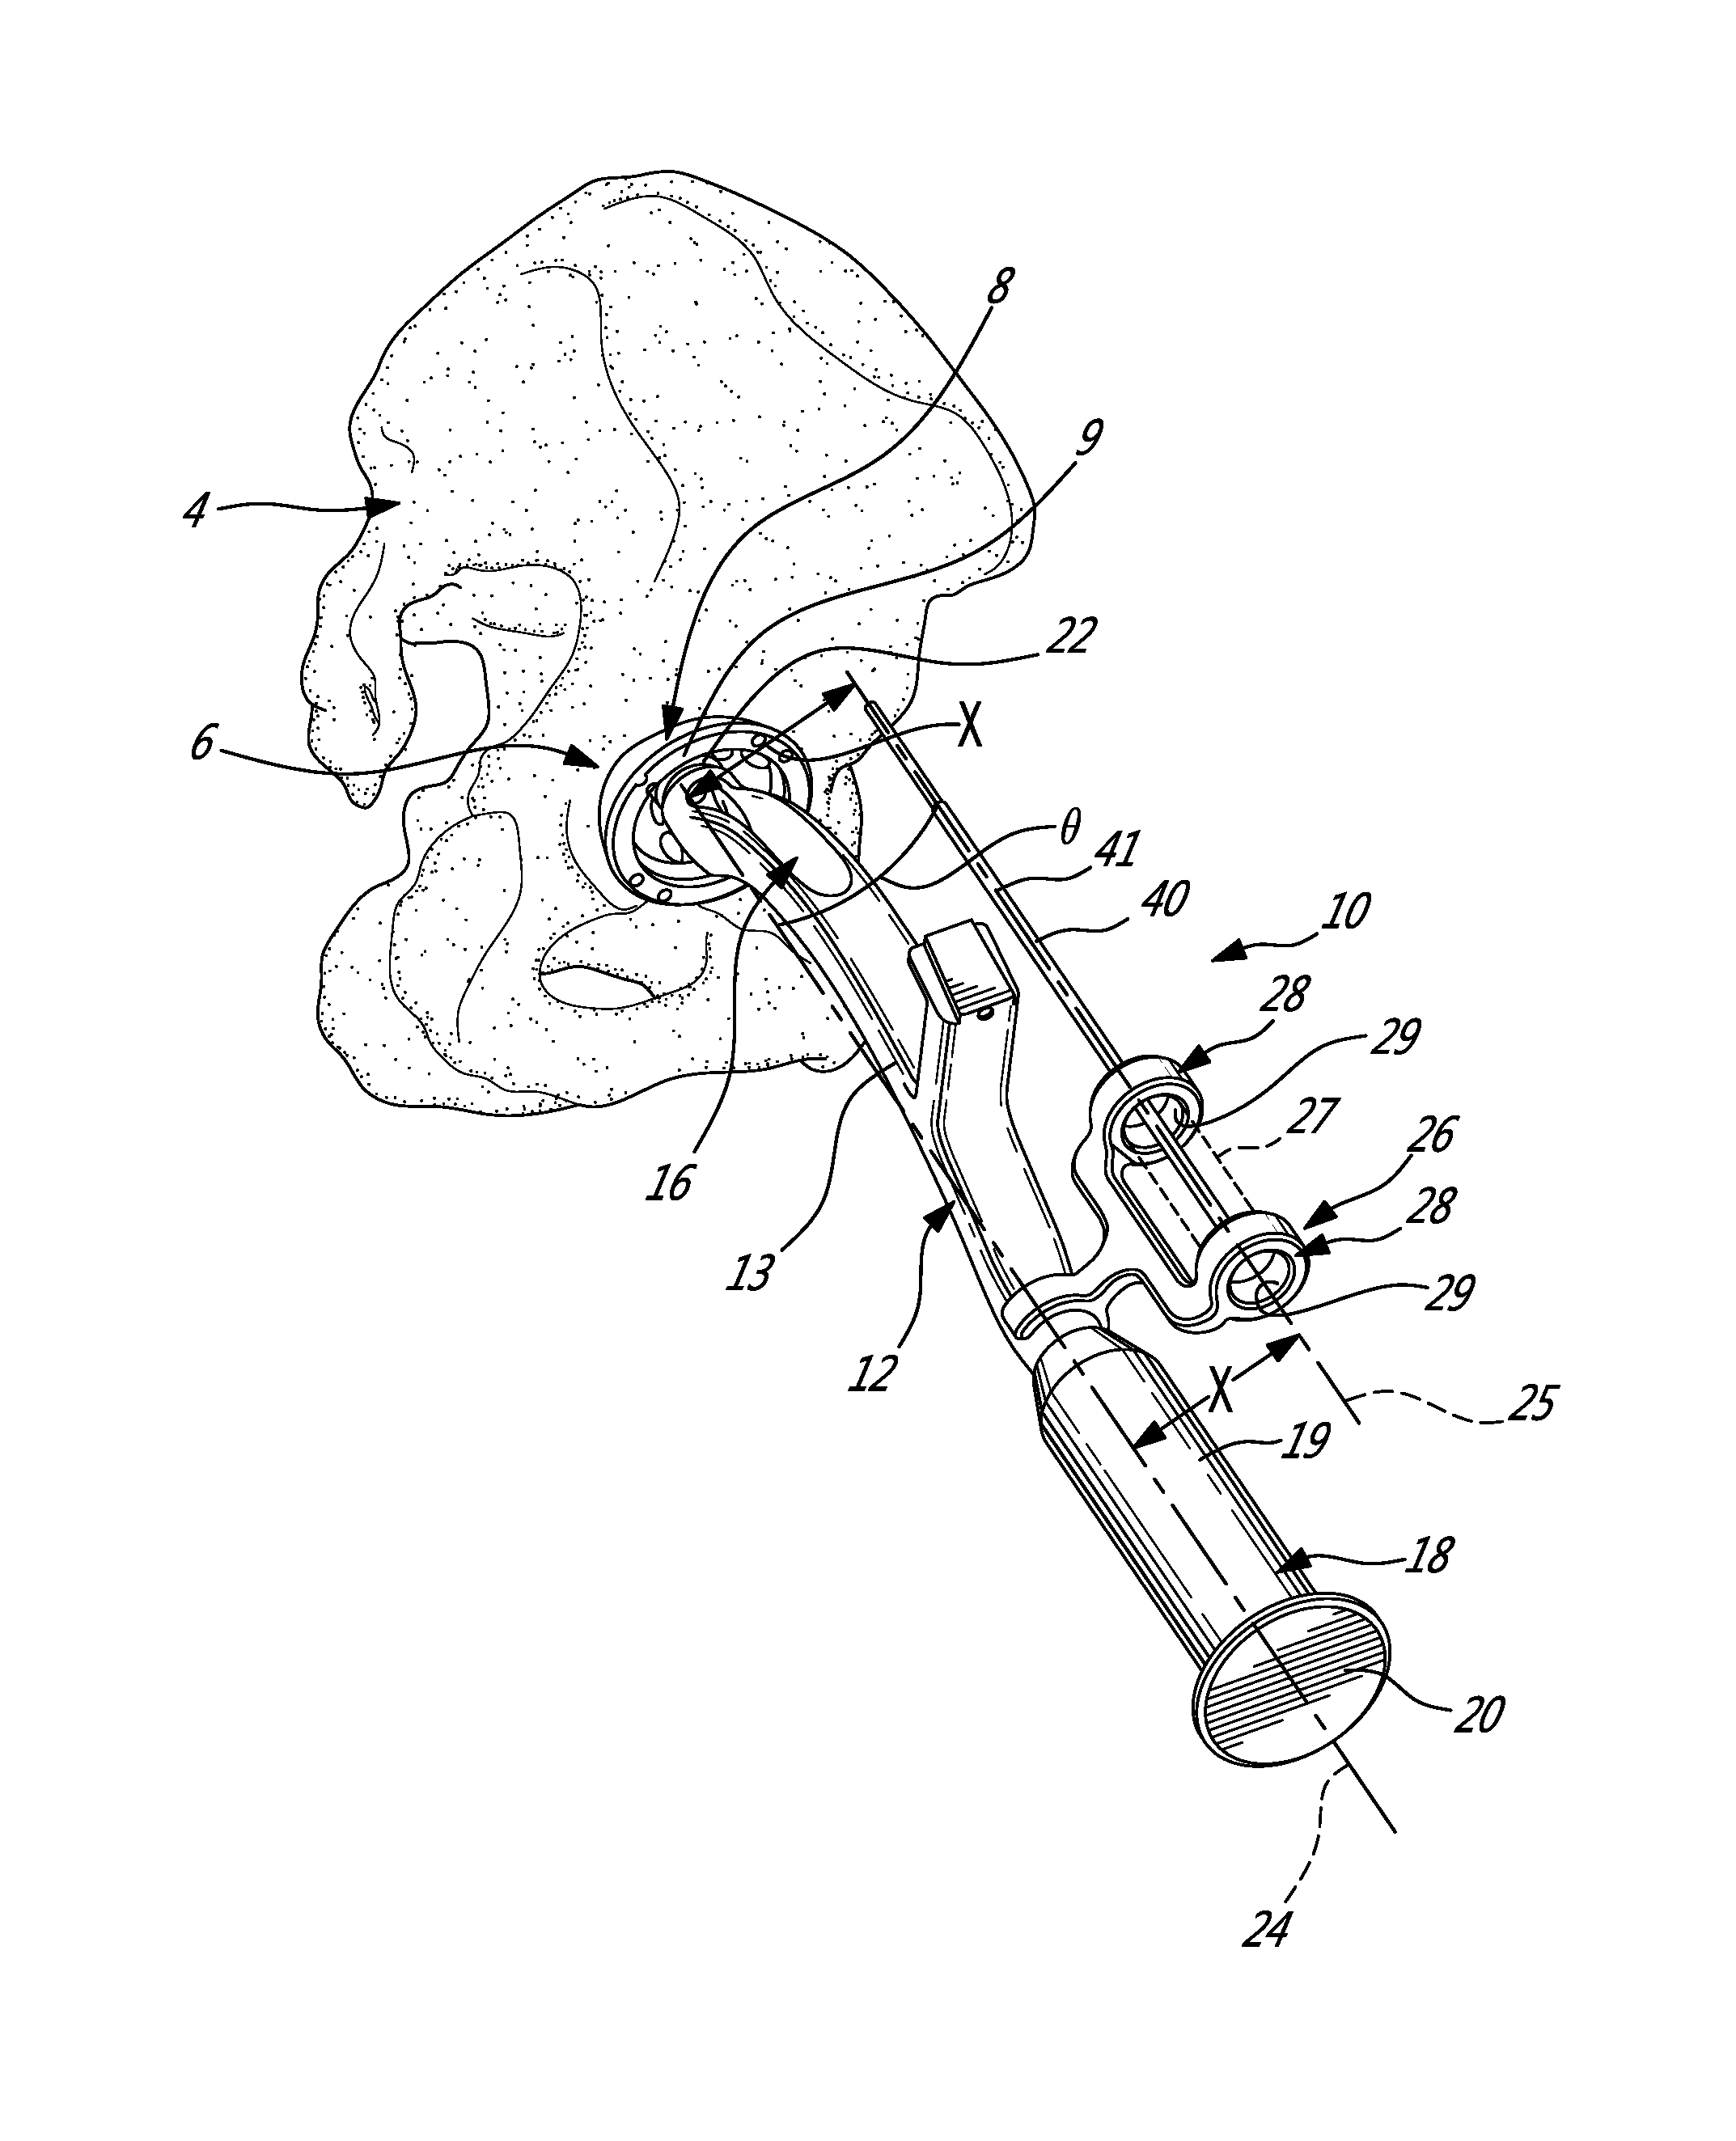 Mechanically guided impactor for hip arthroplasty